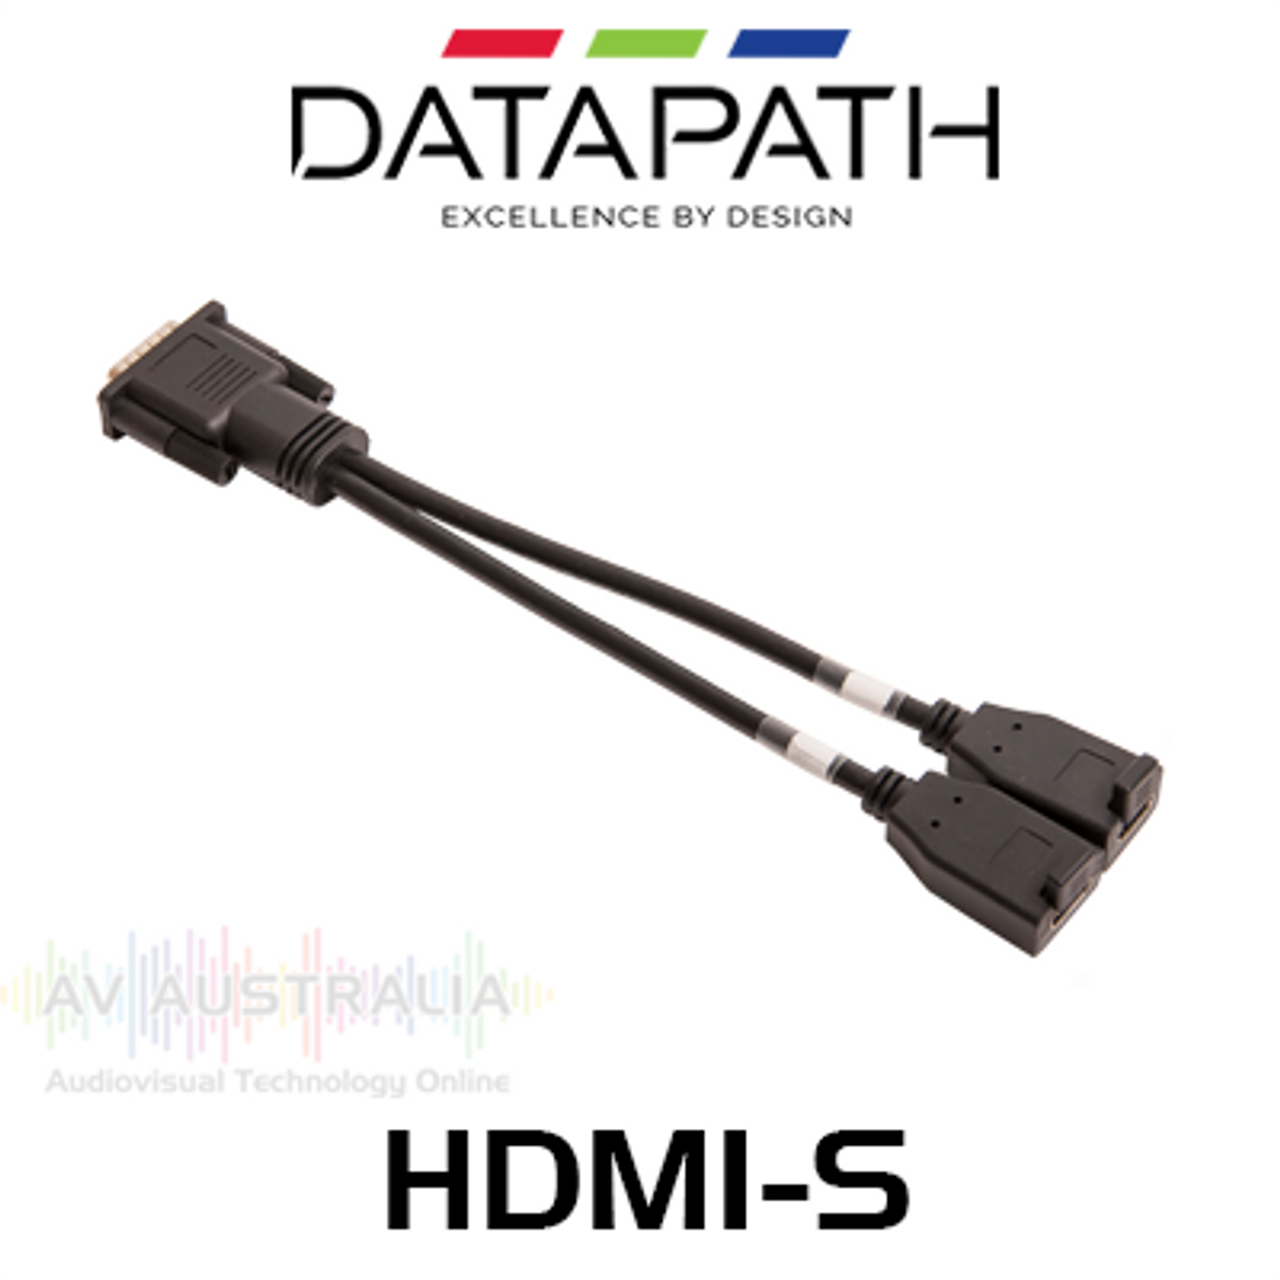 Datapath HDMI Input Splitter Cable For VisionHD4 and VisionHD4+